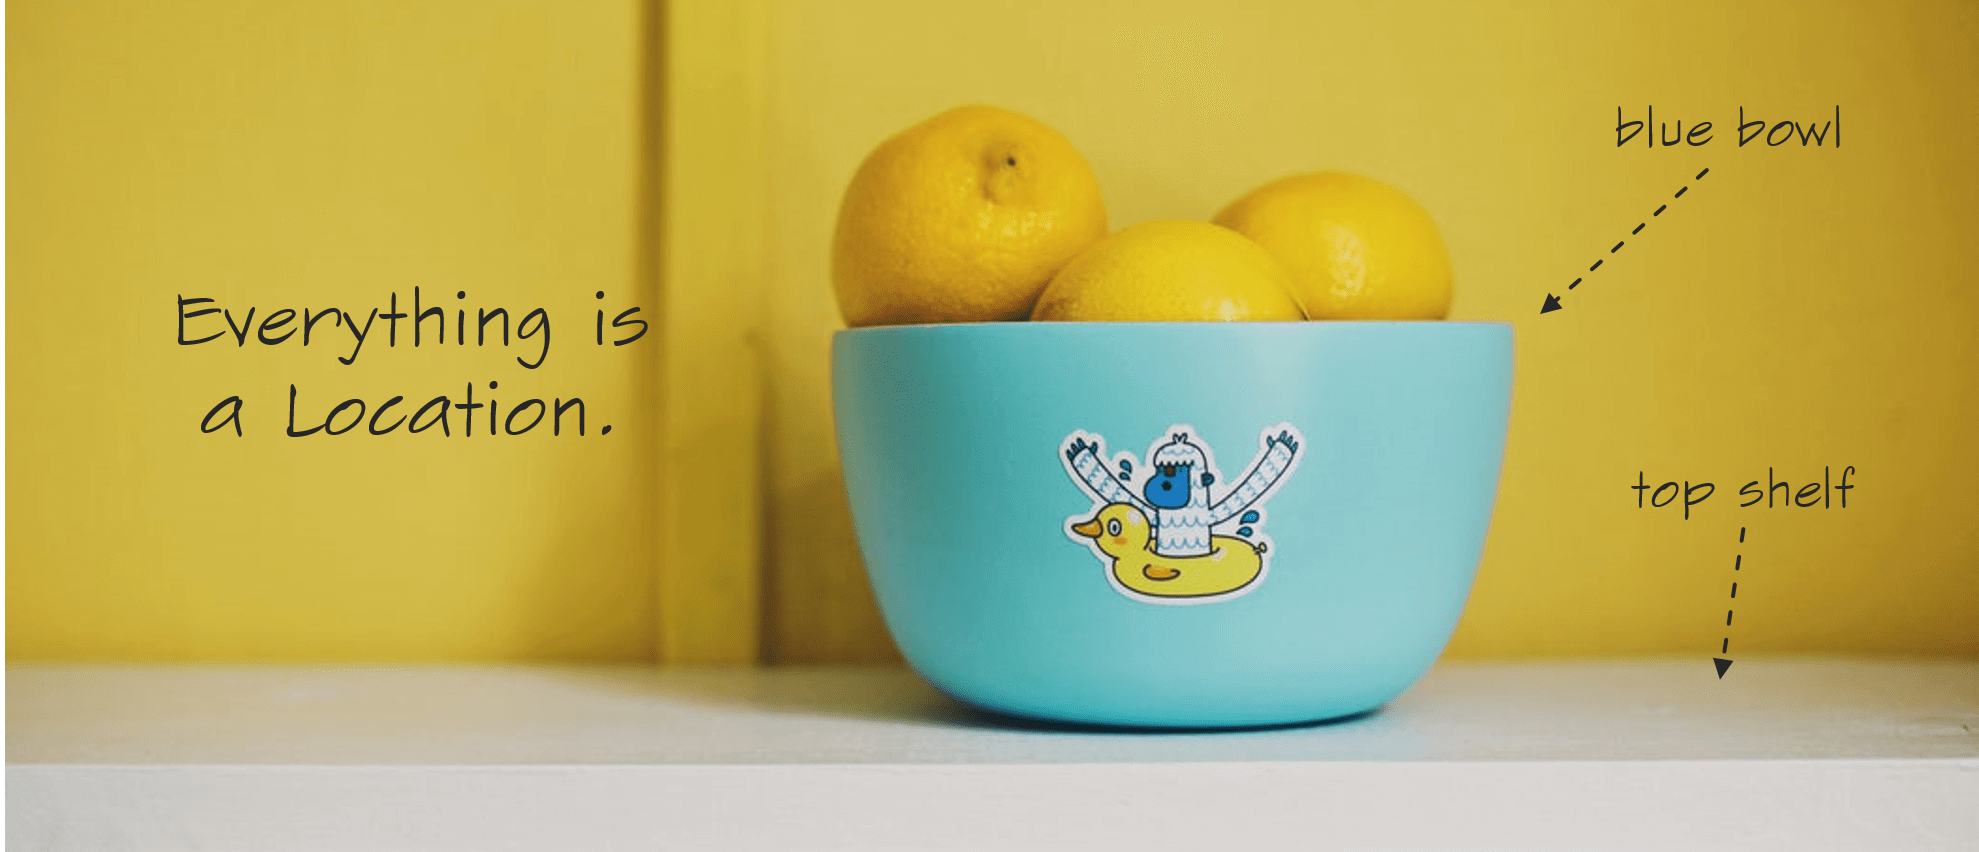 A blue bowl of lemons on a shelf. For Inventory Visibility treat everything like a location